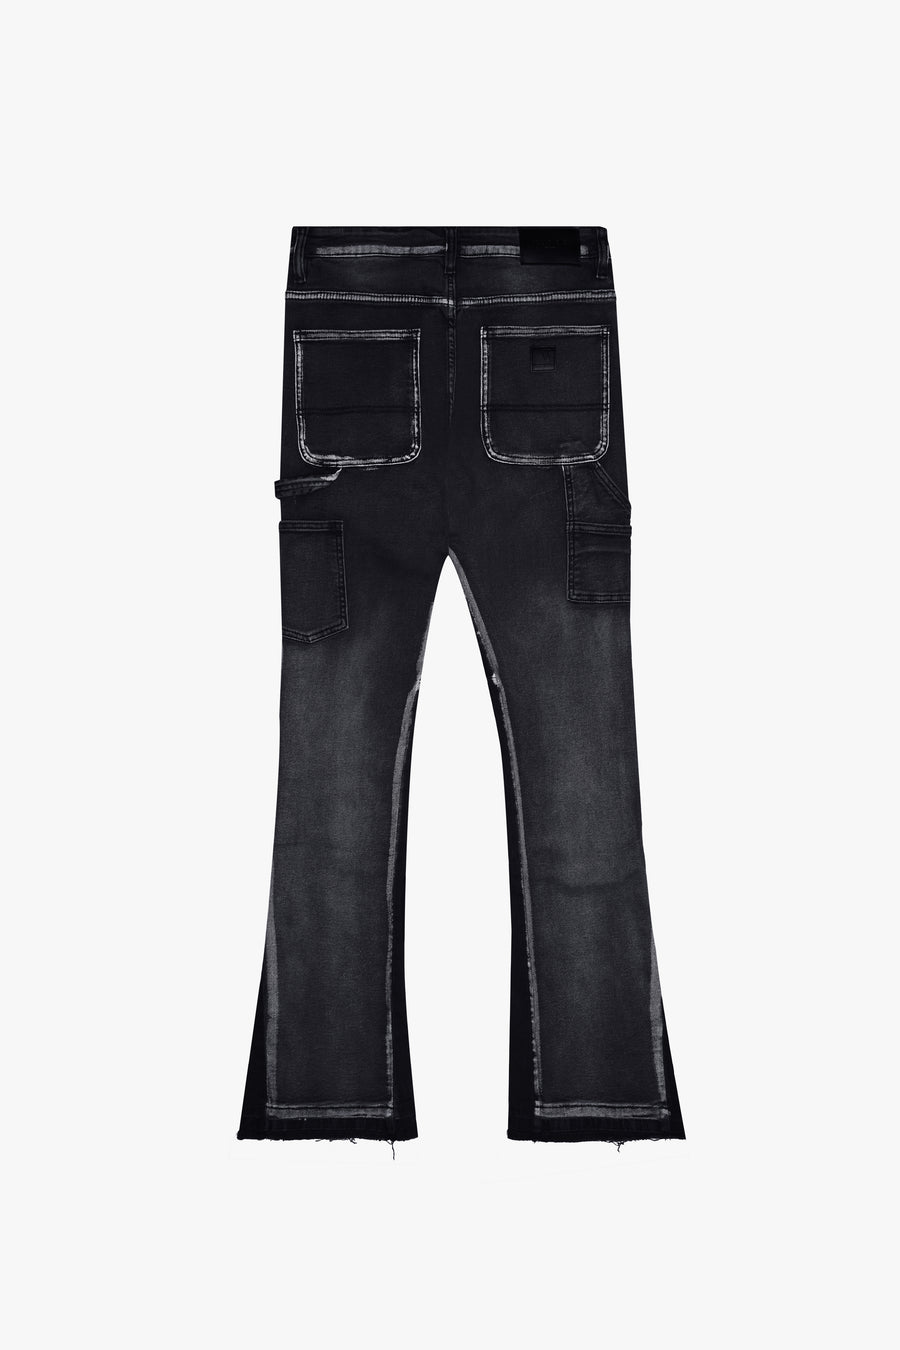 "THE CARPENTER” BLACK WASH STACKED FLARE JEAN